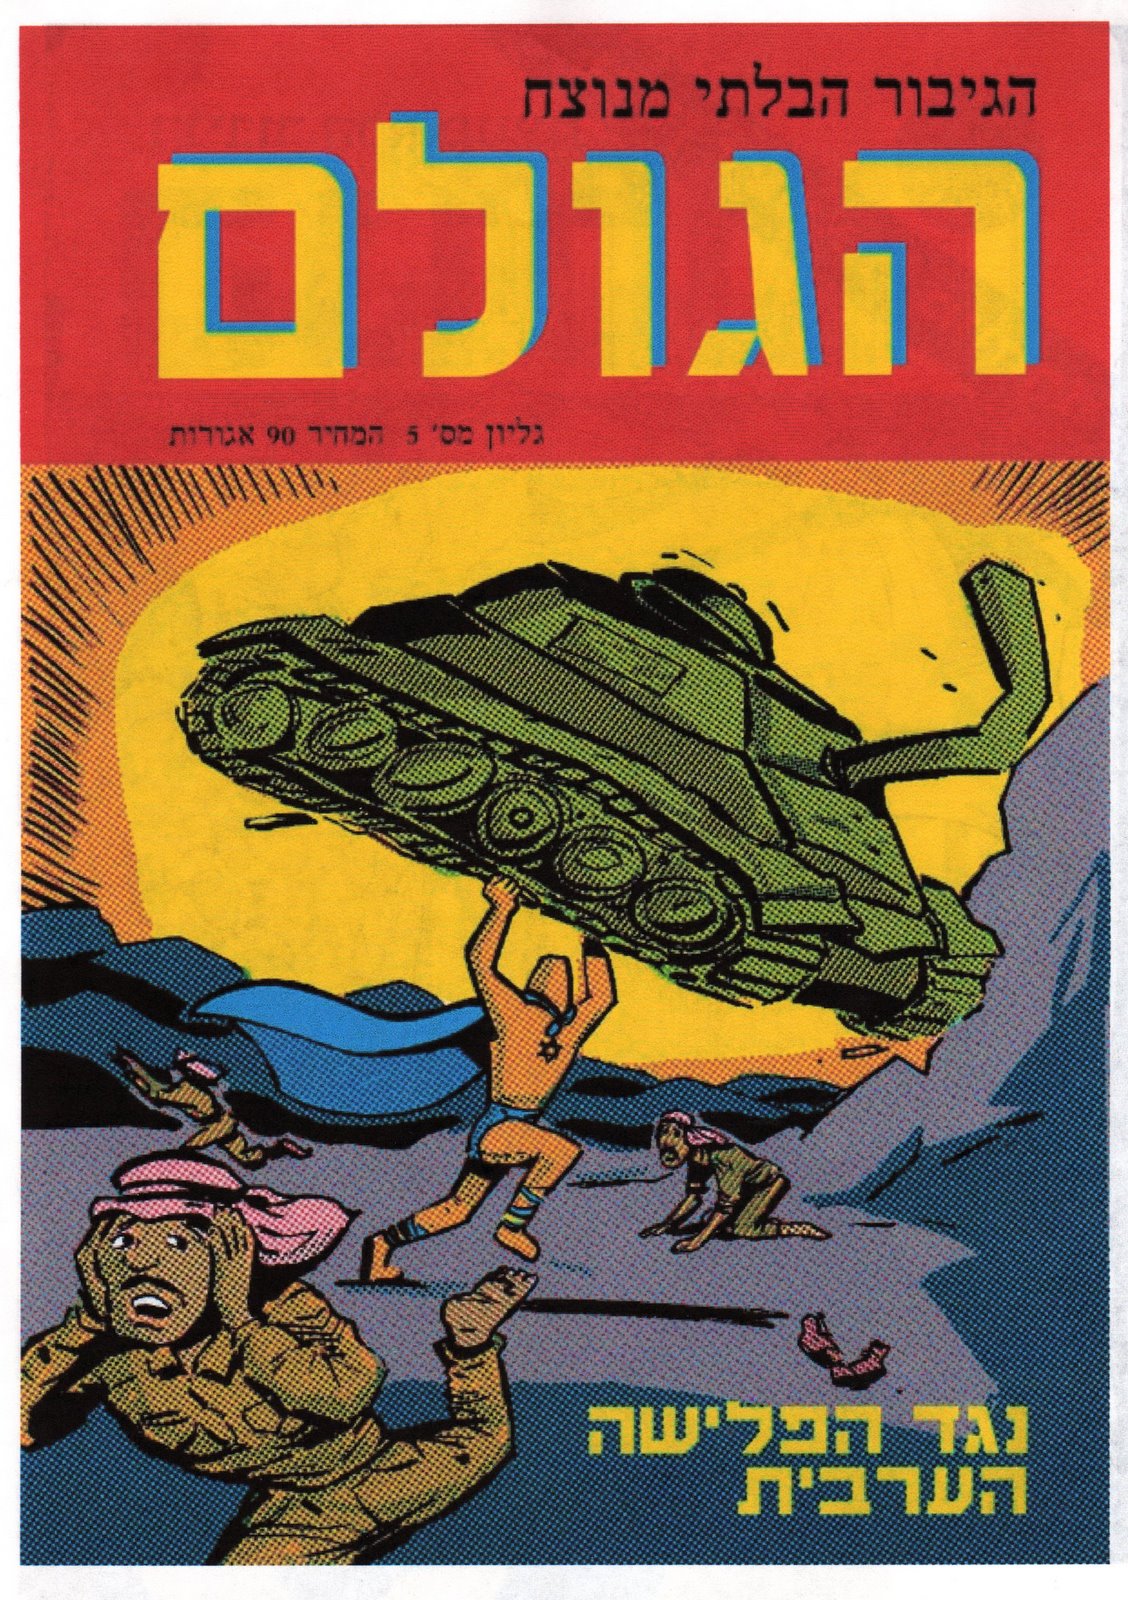 cover of a non-existent issue of the Golem comic